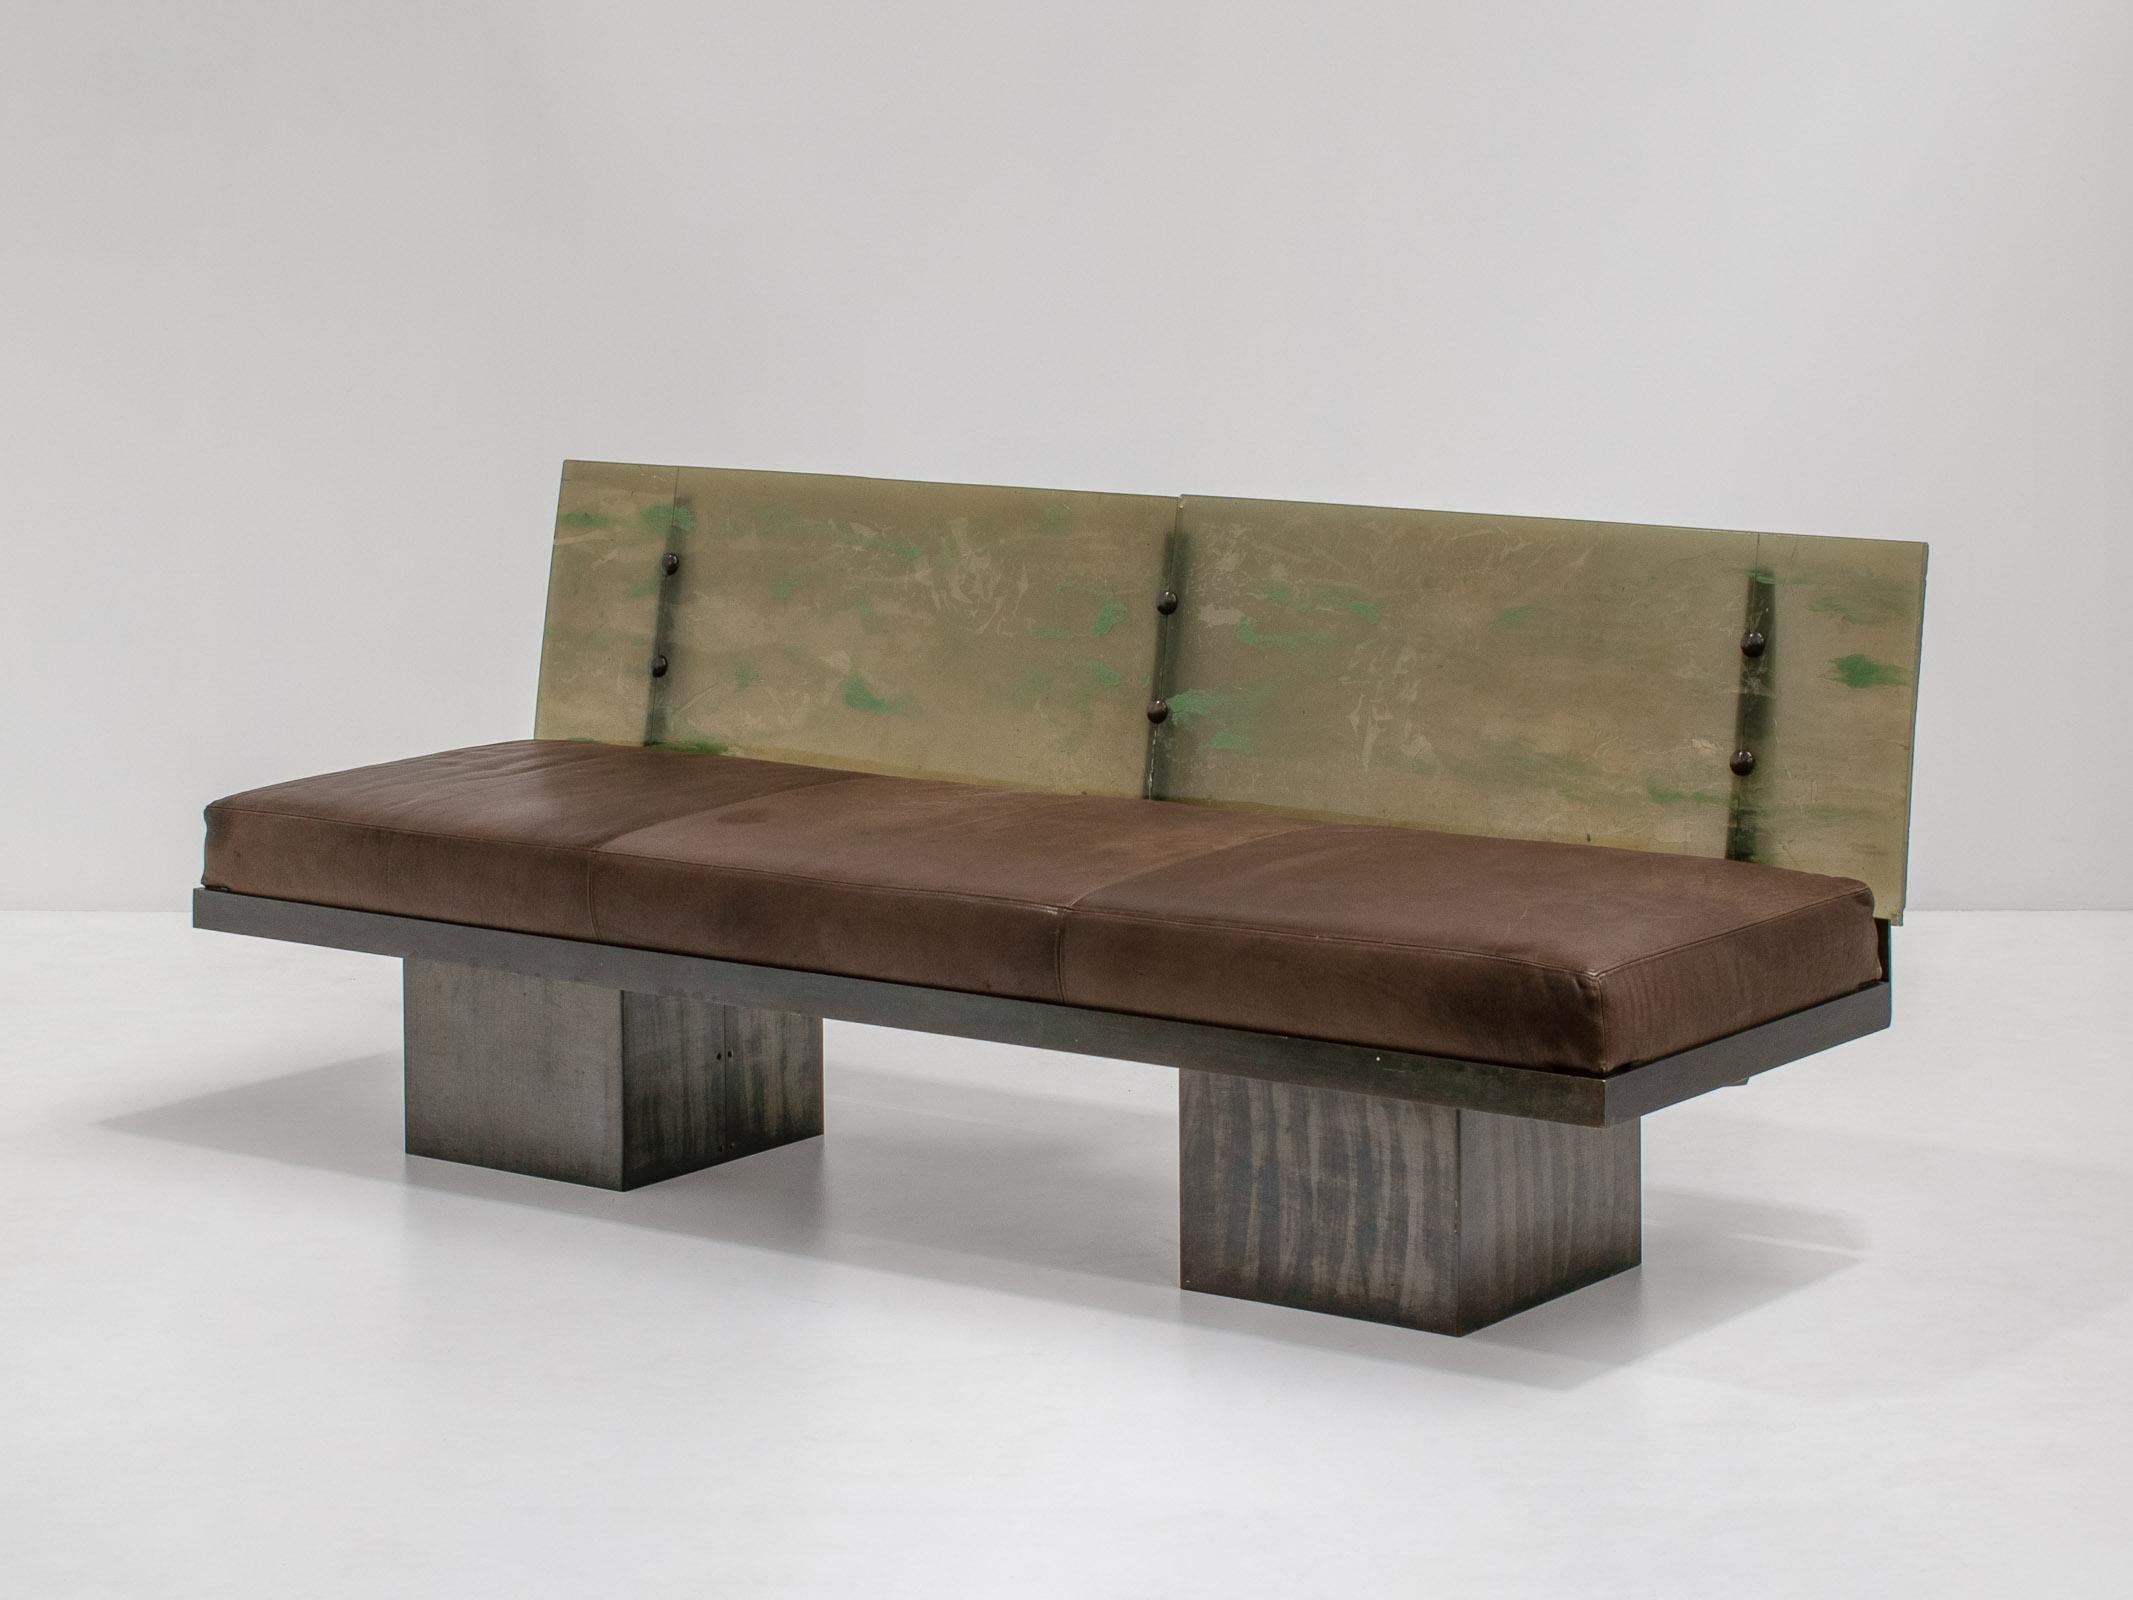 Very unique and unusual sofa. Inspired by the Maria Pergay, Michel Boyer era. Sourced in the south of France. Postmodernism.

The bench is made of multiple materials, creating a beautiful composition. The base of the sofa is made of steel and has a